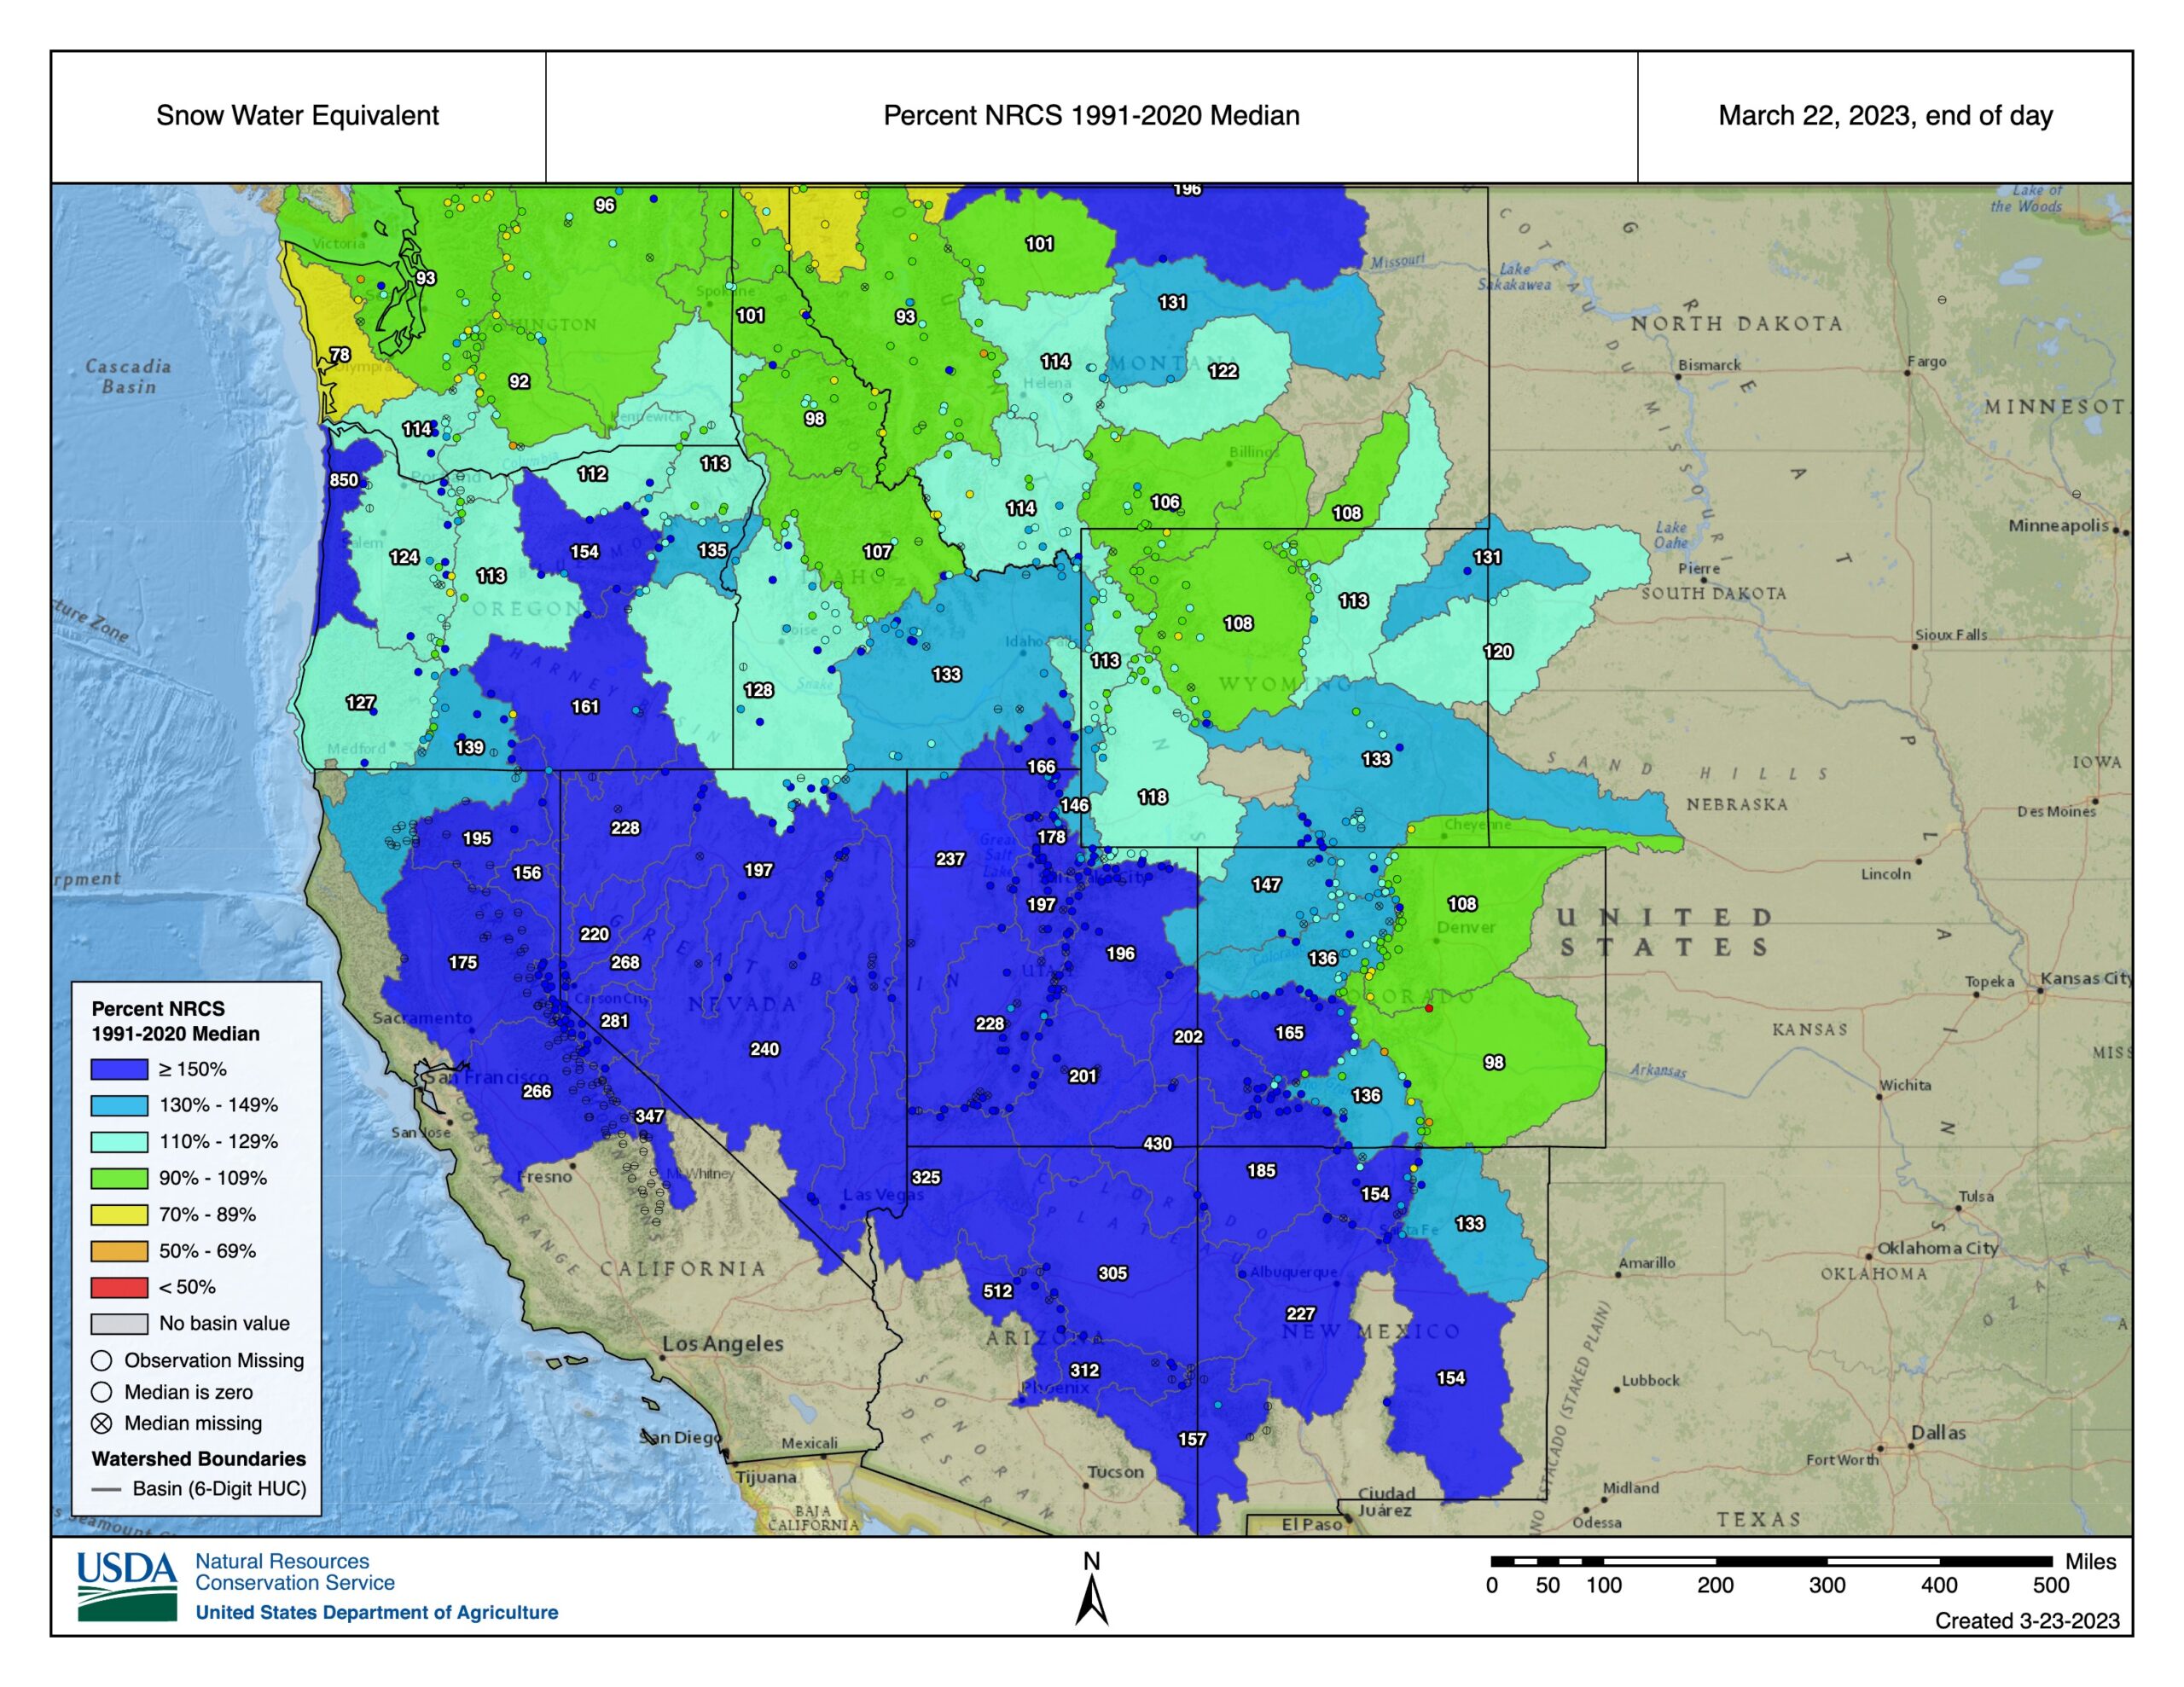 Snow Water Equivalent of snowpack as a percent of the 1991-2020 median as of March 23.